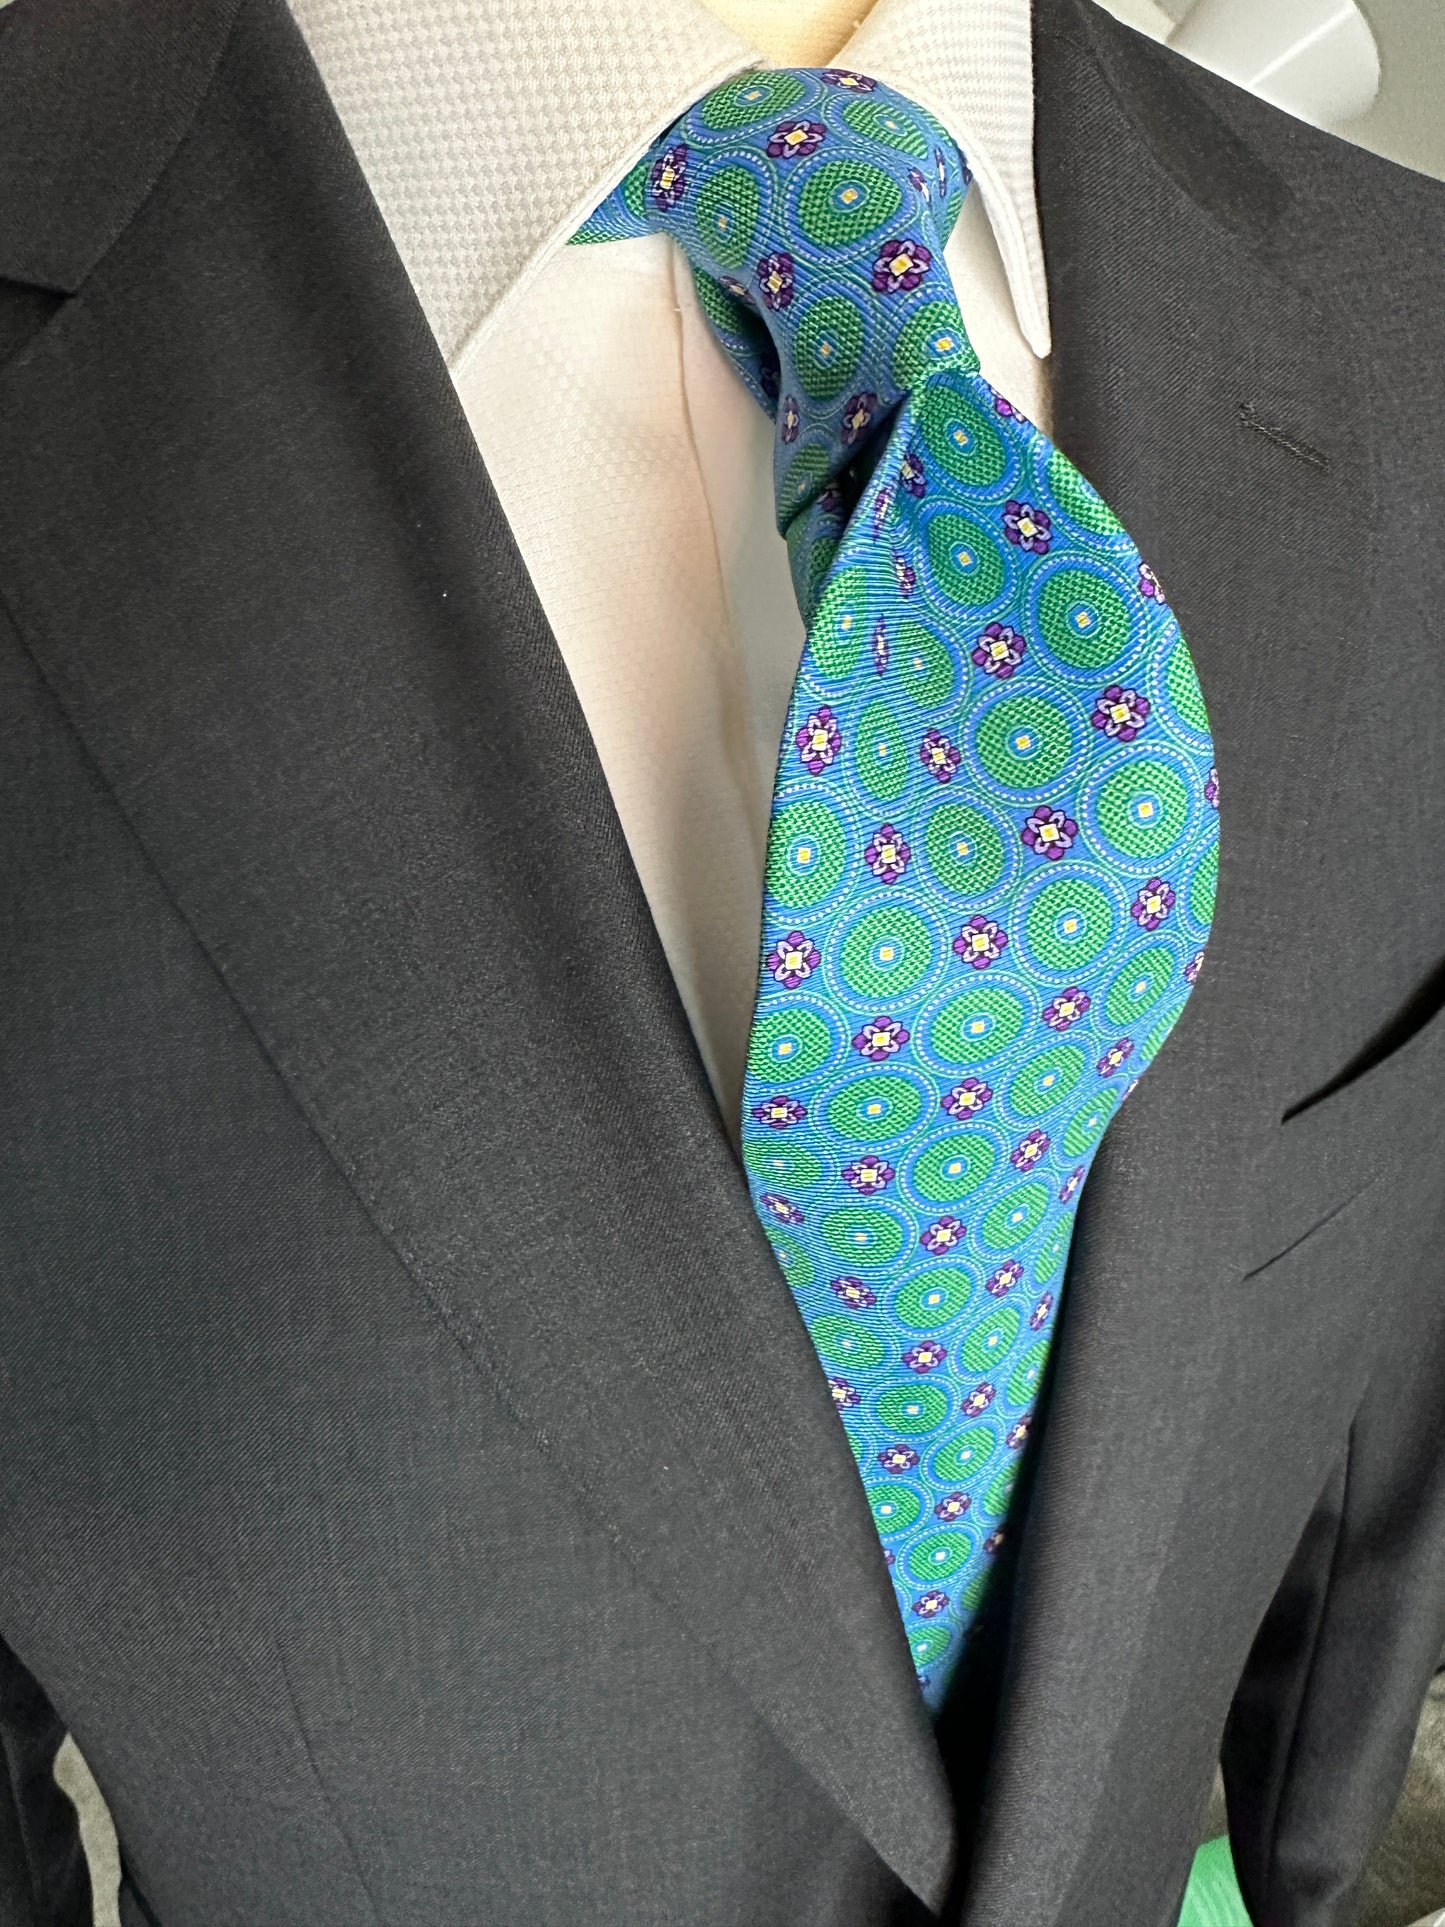 This tie with circular medallions in green surrounded by a beautiful blue background is 100% silk. Paired with dark suits and stripes this necktie allows for great soft contrast on white or sky blue and grey dress shirts. Try the sister tie in pink and blue for more combinations.